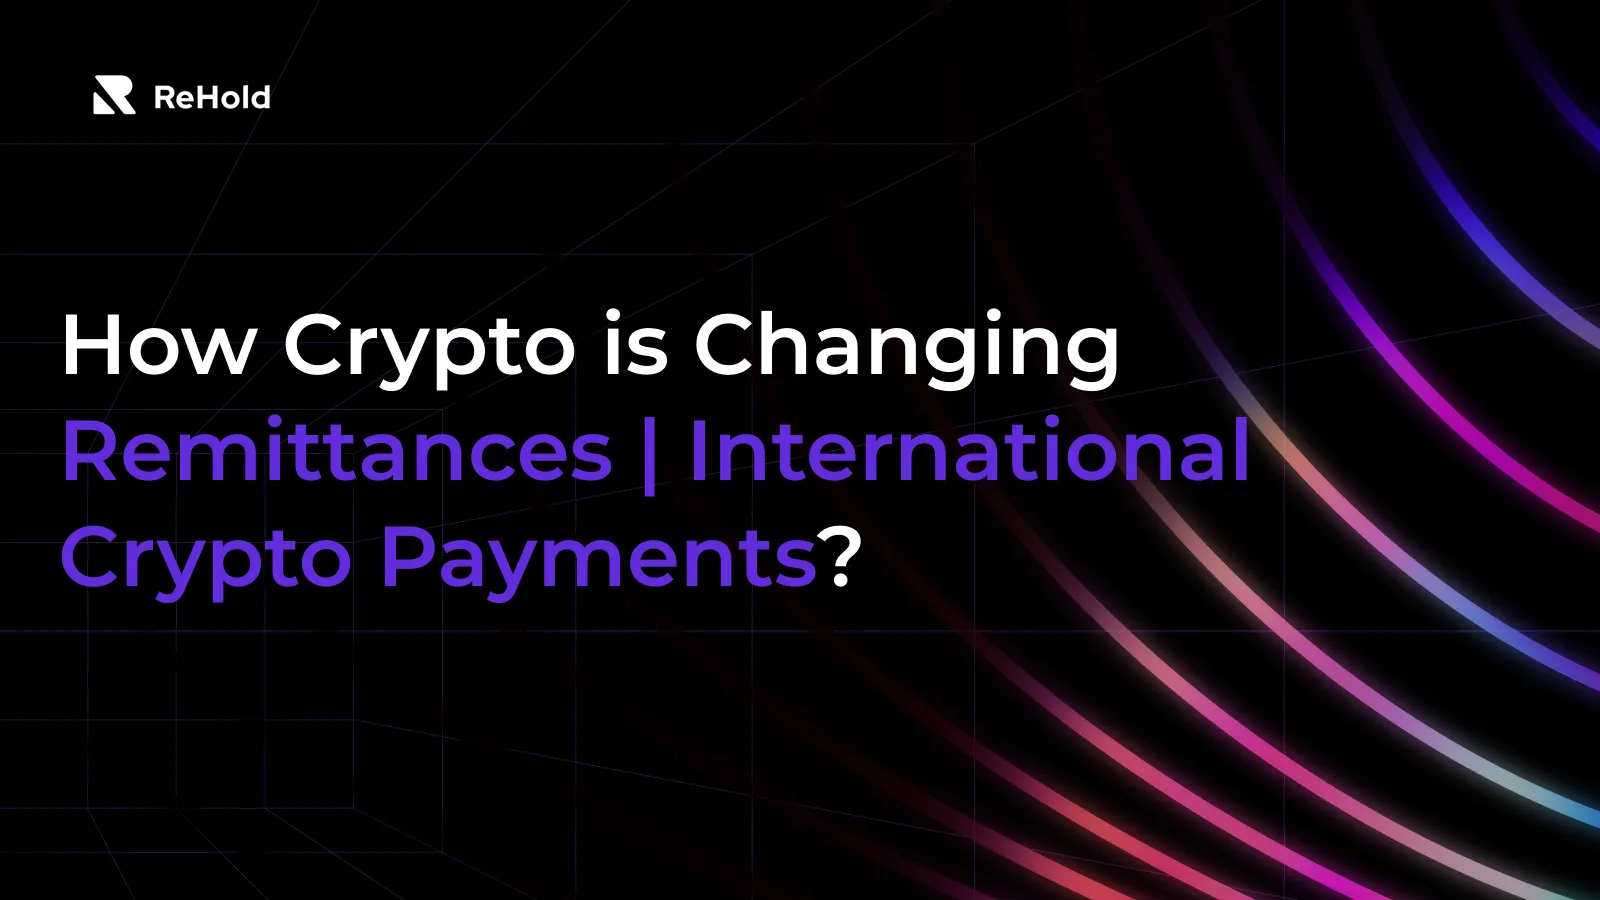 How Crypto is Changing Remittances | International Crypto Payments